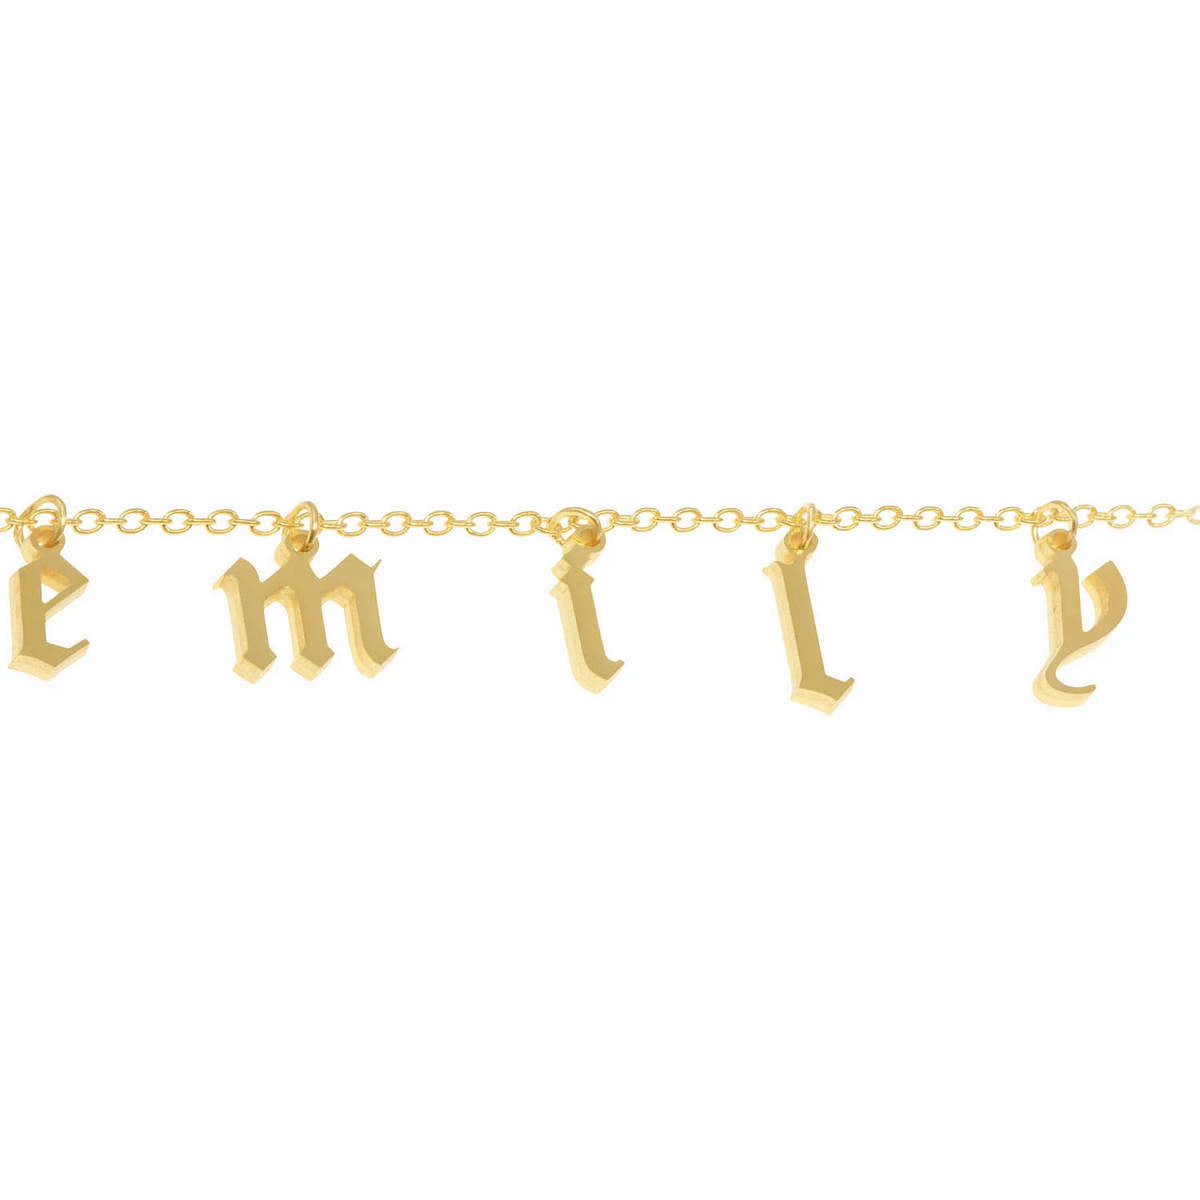 The MVP Personalized Name Anklet